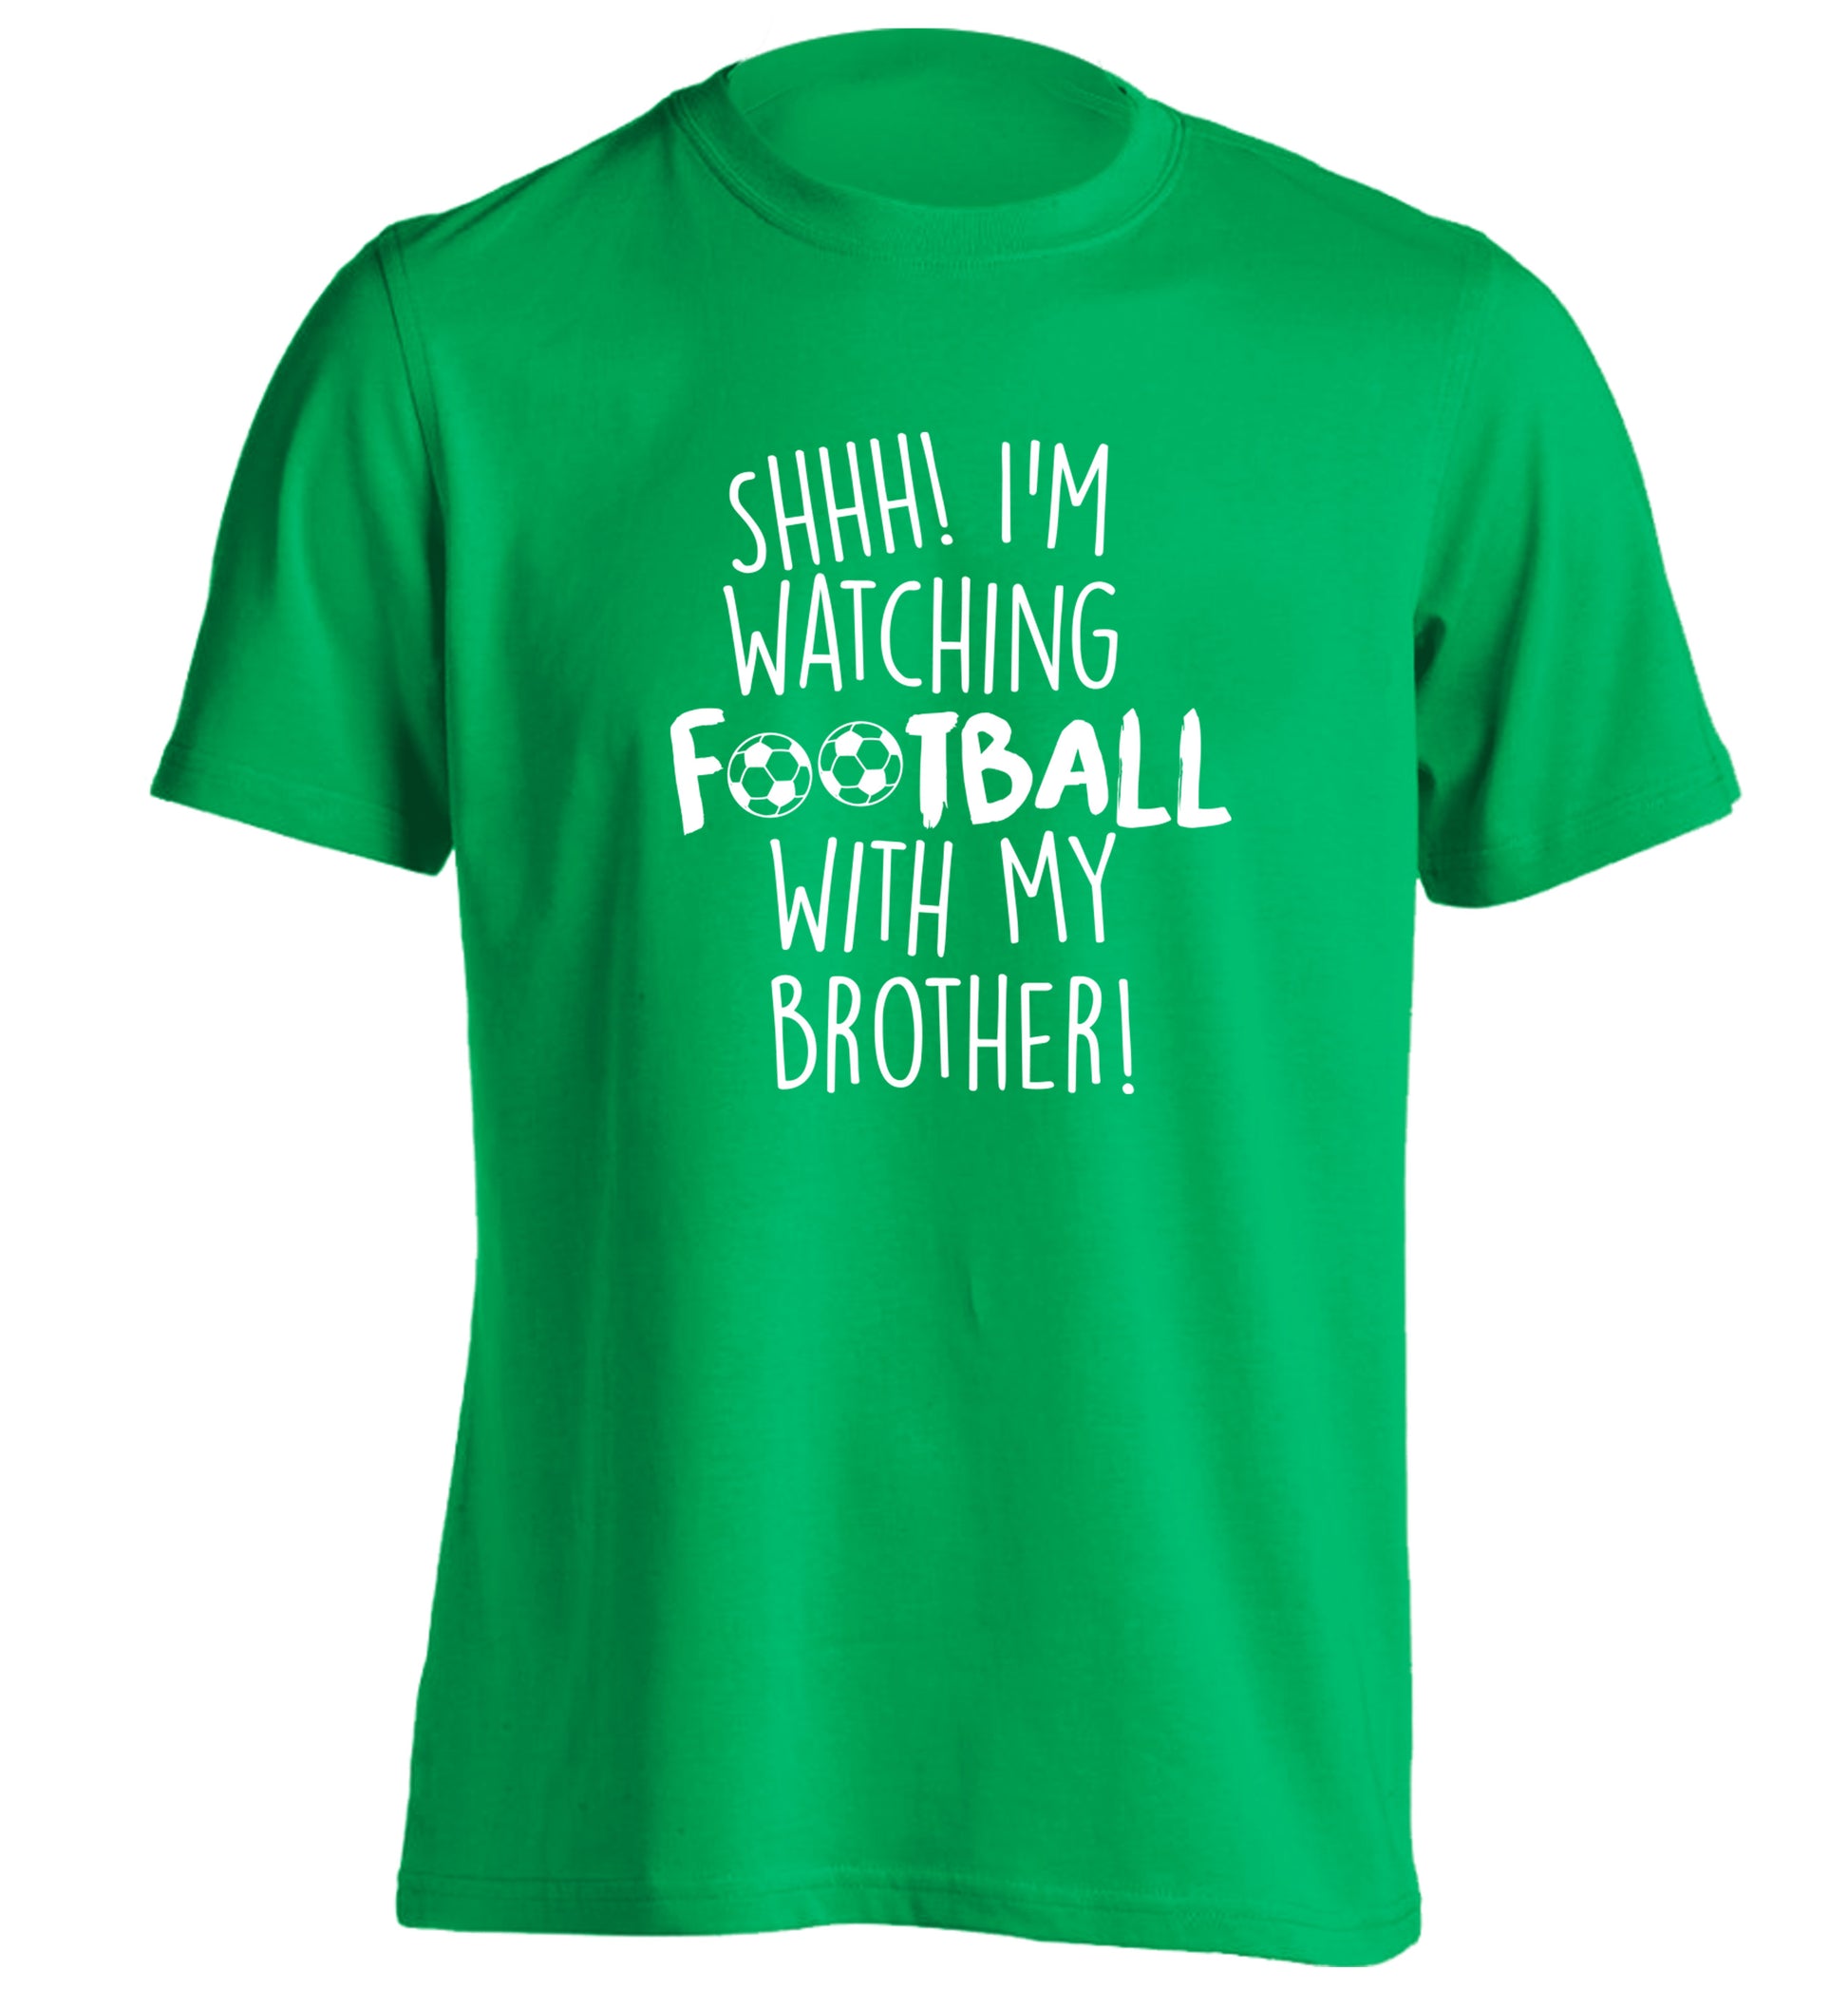 Shhh I'm watching football with my brother adults unisexgreen Tshirt 2XL